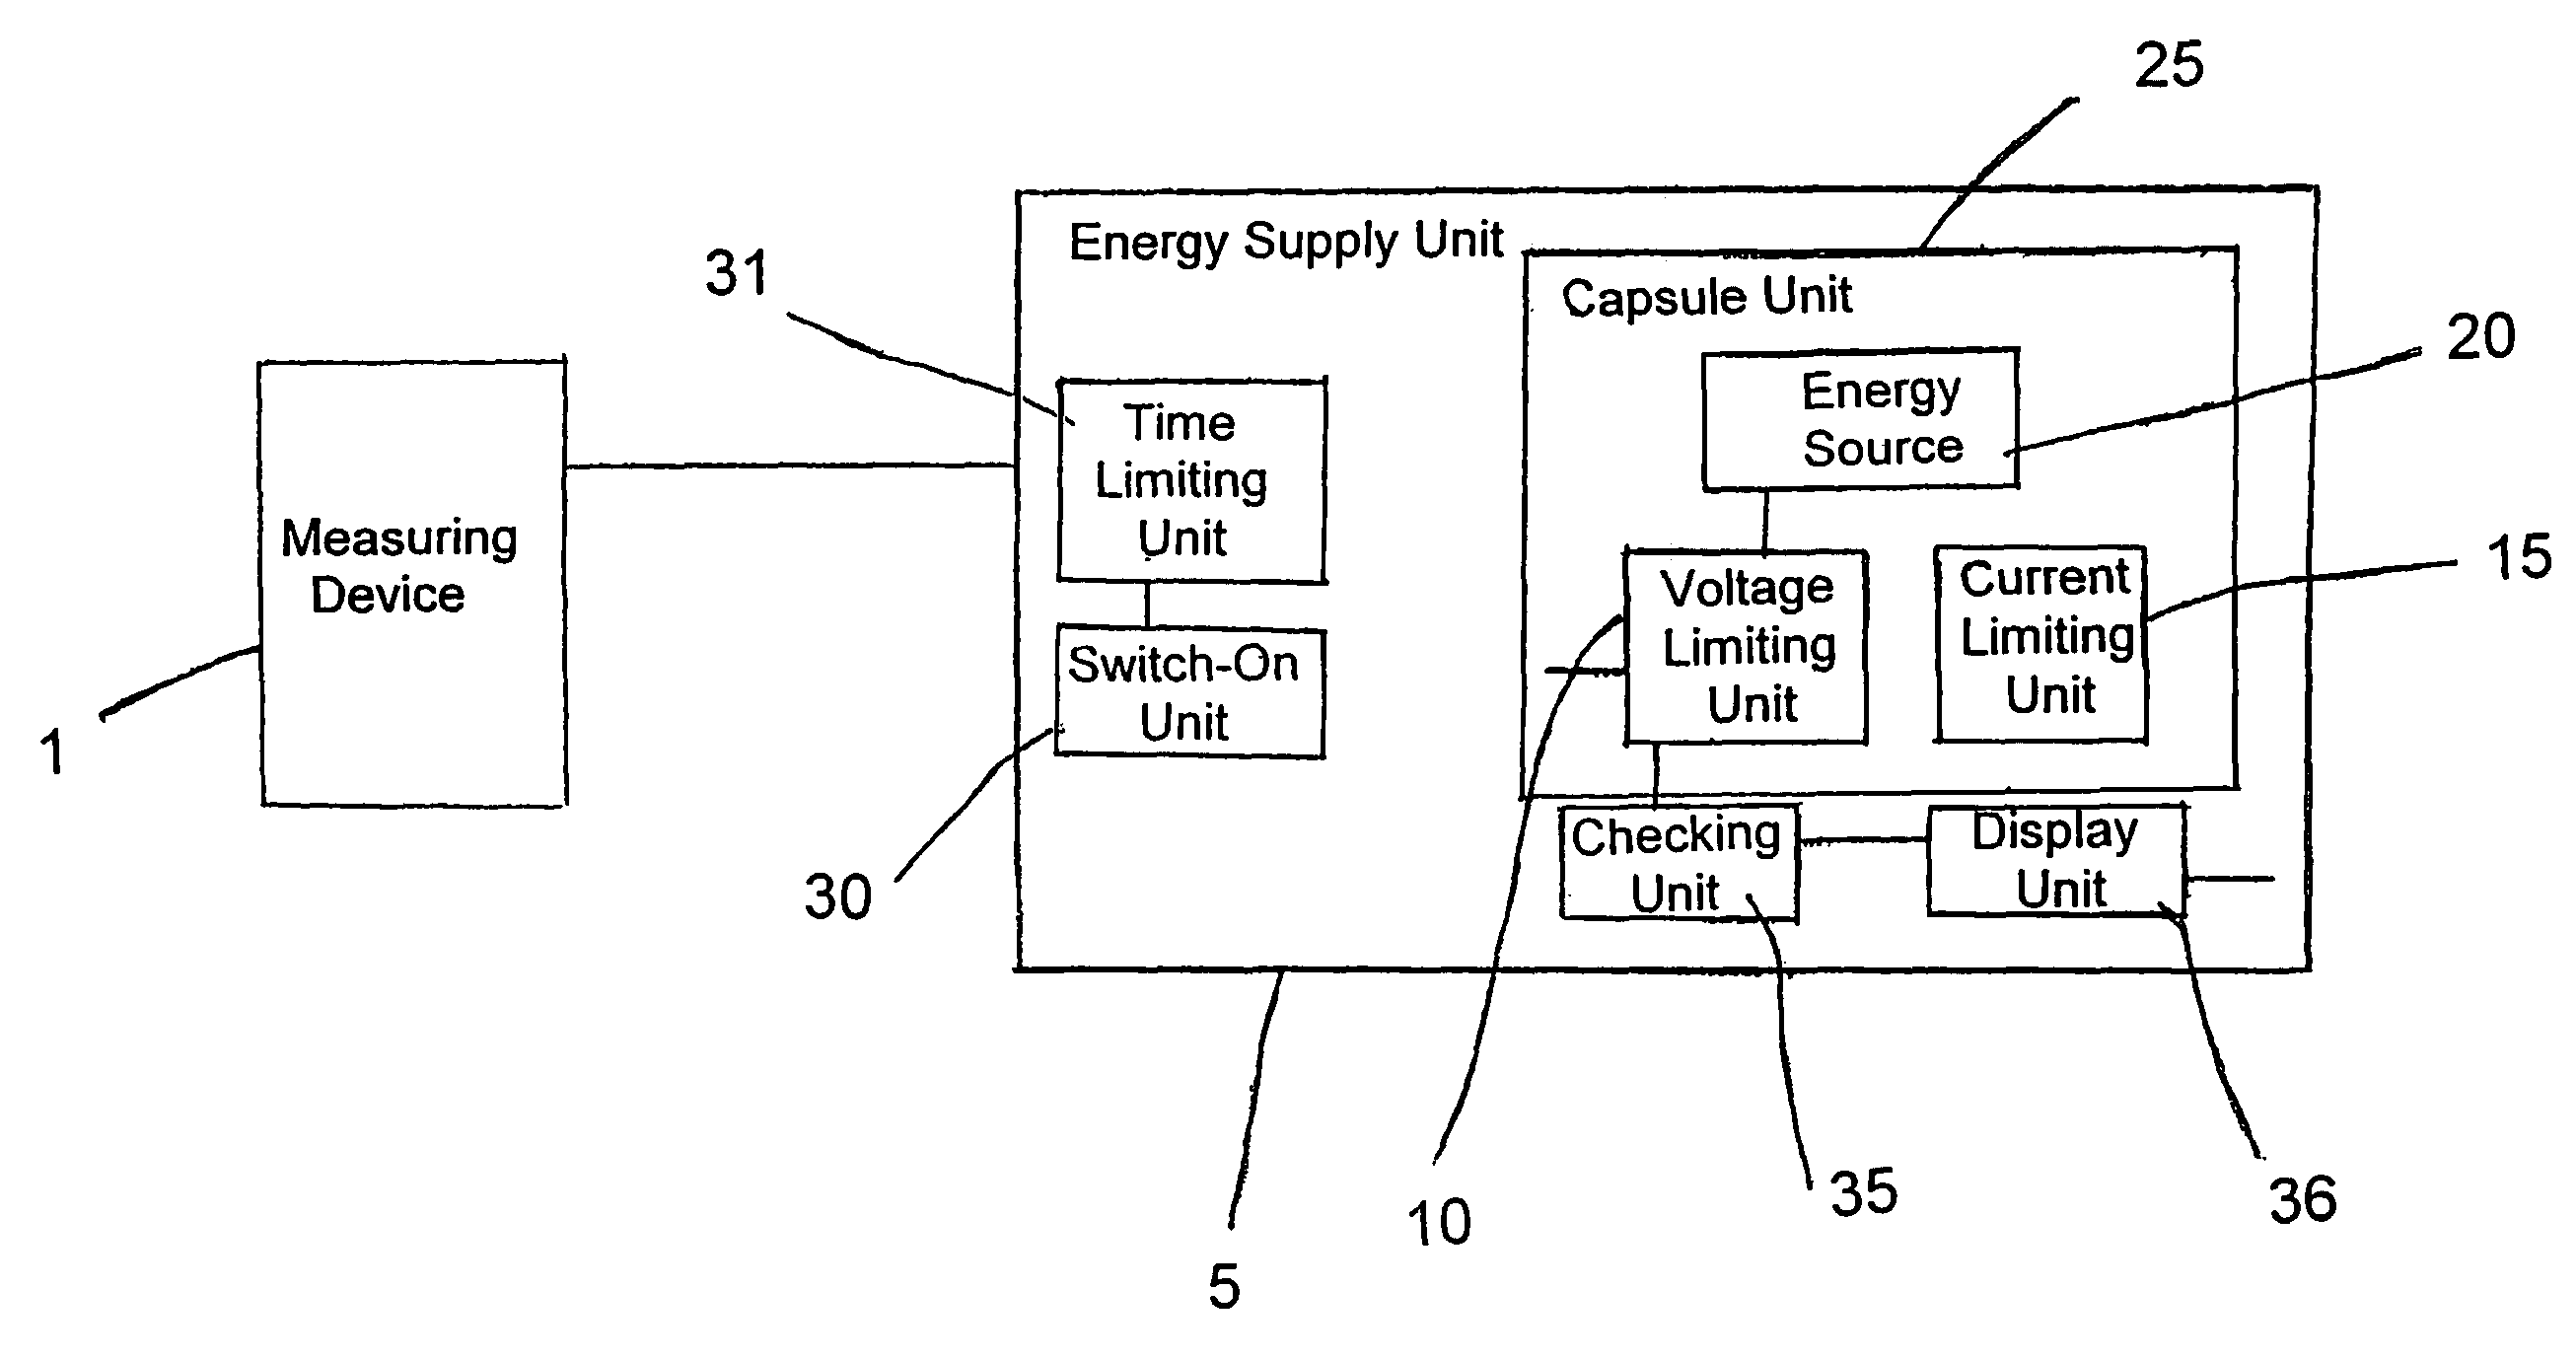 Energy supply of a measuring device